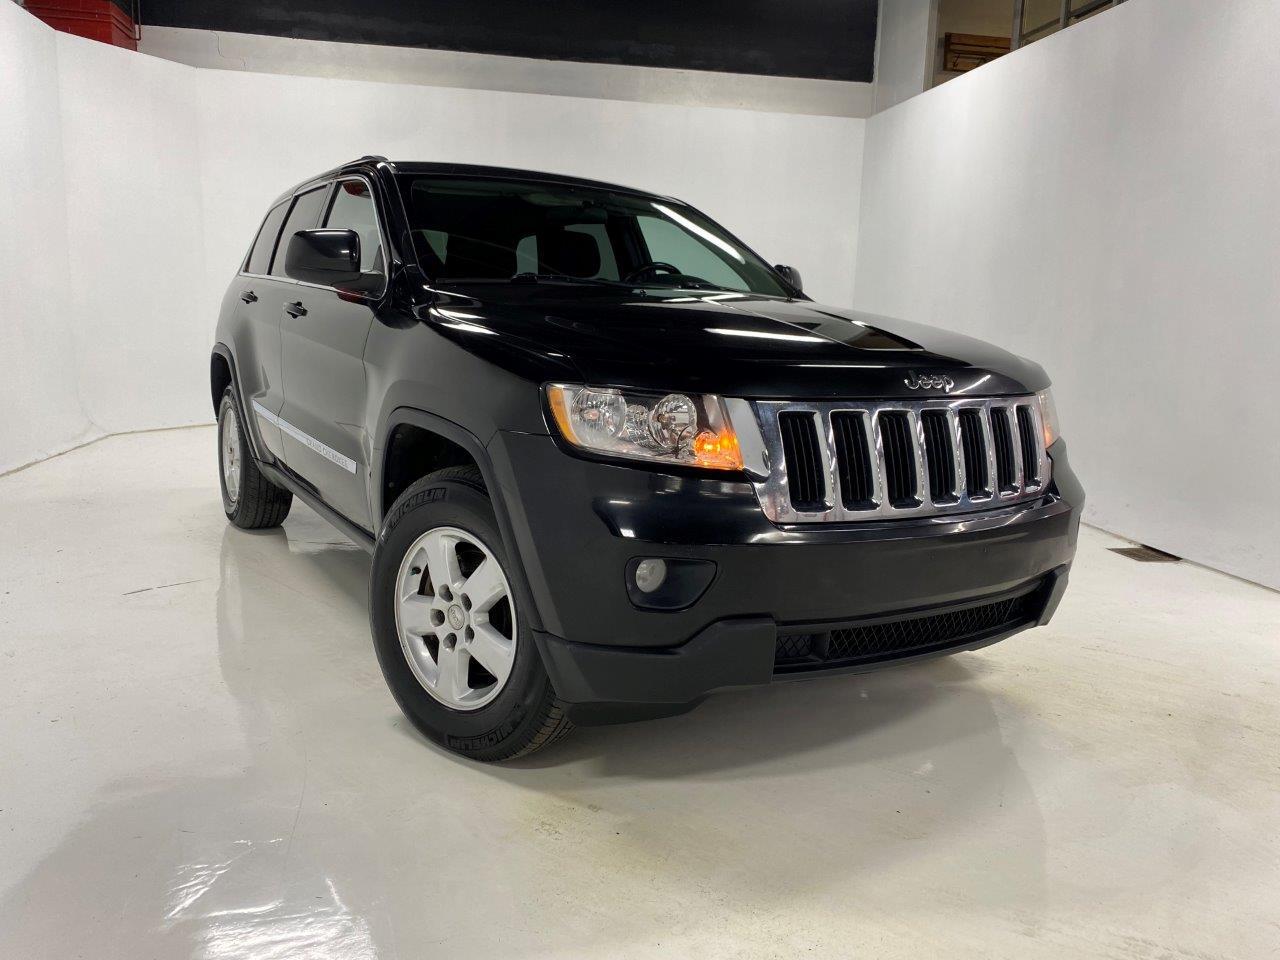 2011 Jeep Grand Cherokee LAREDO 4X4 V6 GROUPE ELECTRIQUE A/C MAGS